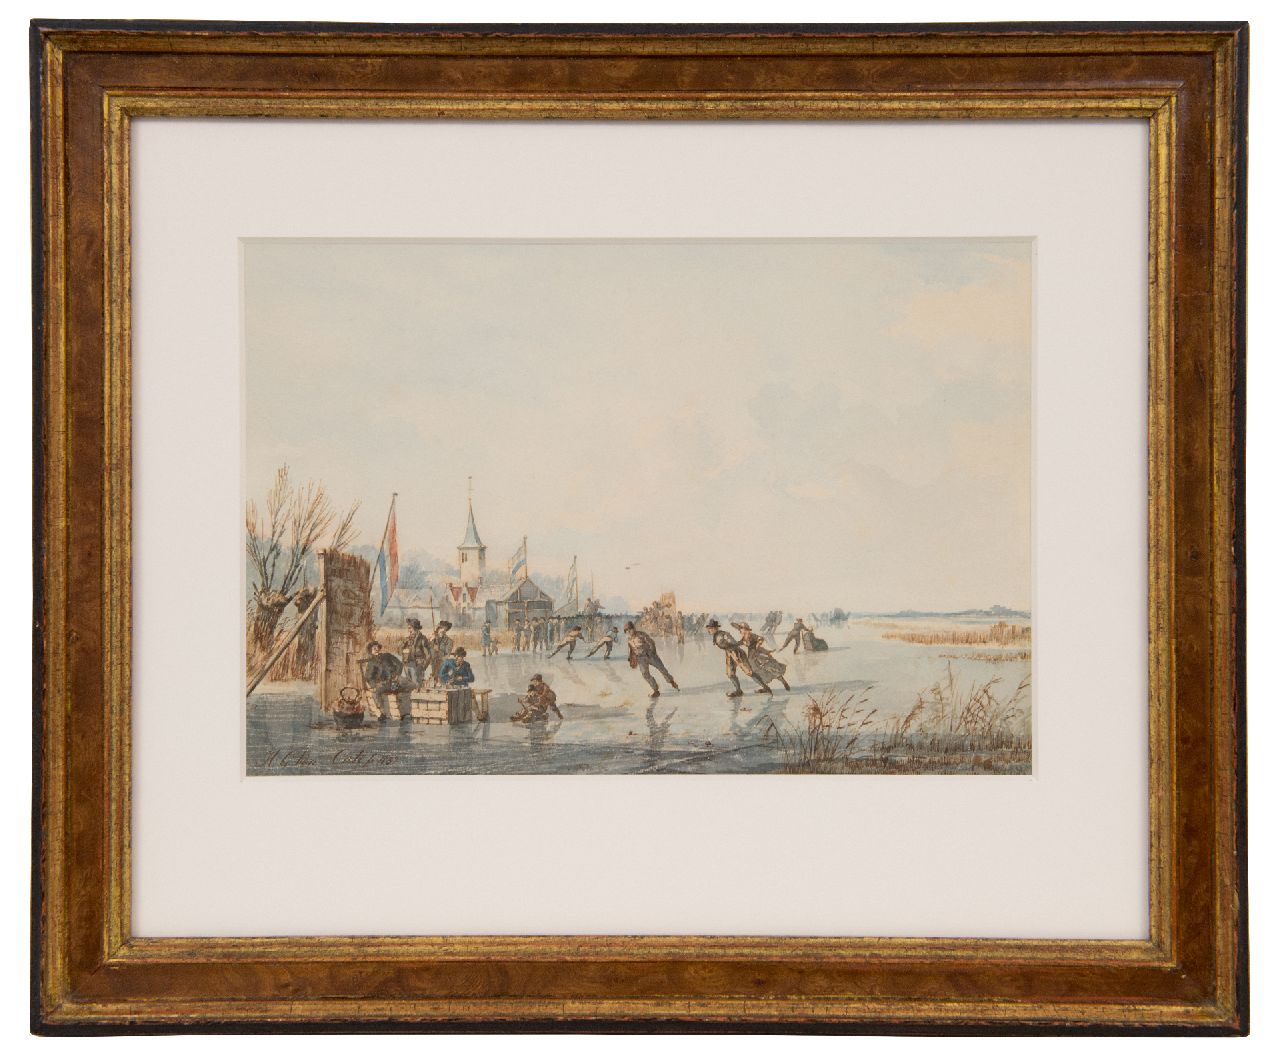 Cate H.G. ten | Hendrik Gerrit ten Cate | Watercolours and drawings offered for sale | Gathering at a skating competition, ink and watercolour on paper 19.4 x 27.7 cm, signed l.l. and dated 1832